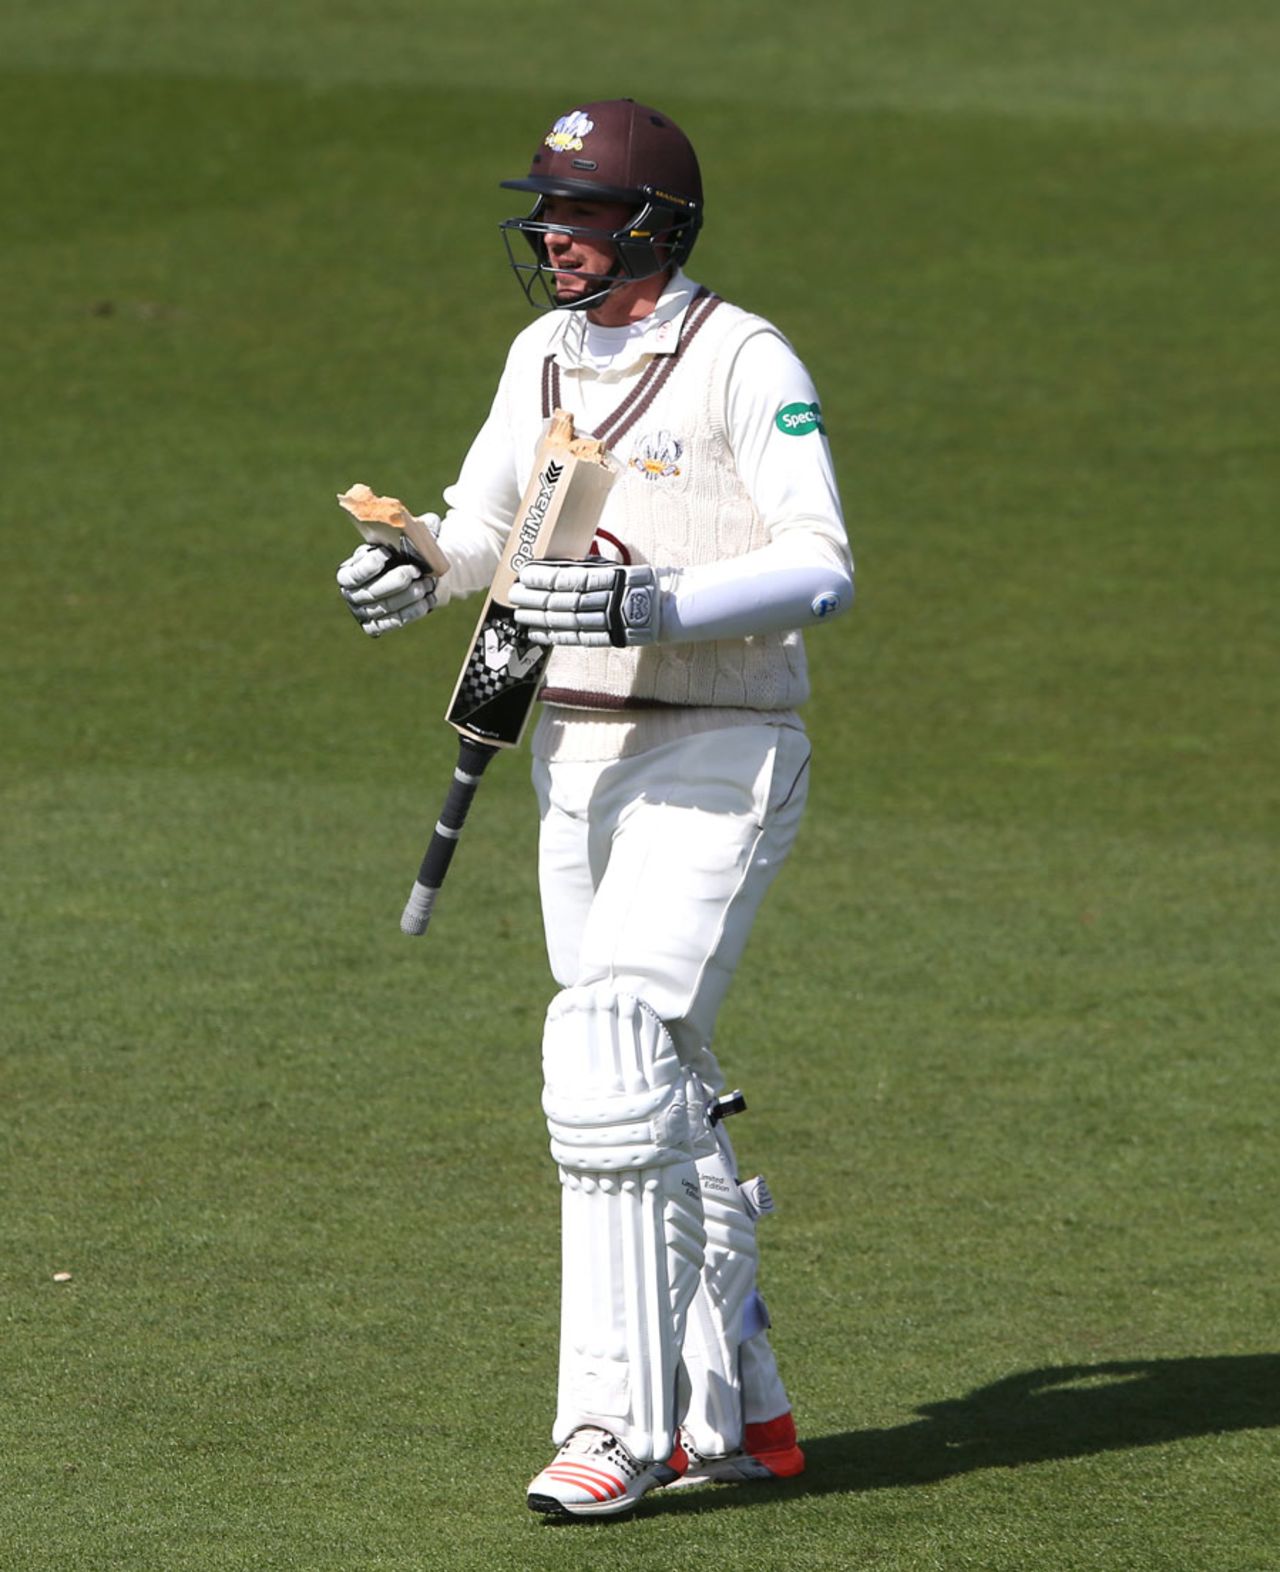 Breaking bat: Mark Footitt calls for a replacement, Nottinghamshire v Surrey, Specsavers County Championship, Division One, Trent Bridge, 4th day, April 13, 2016